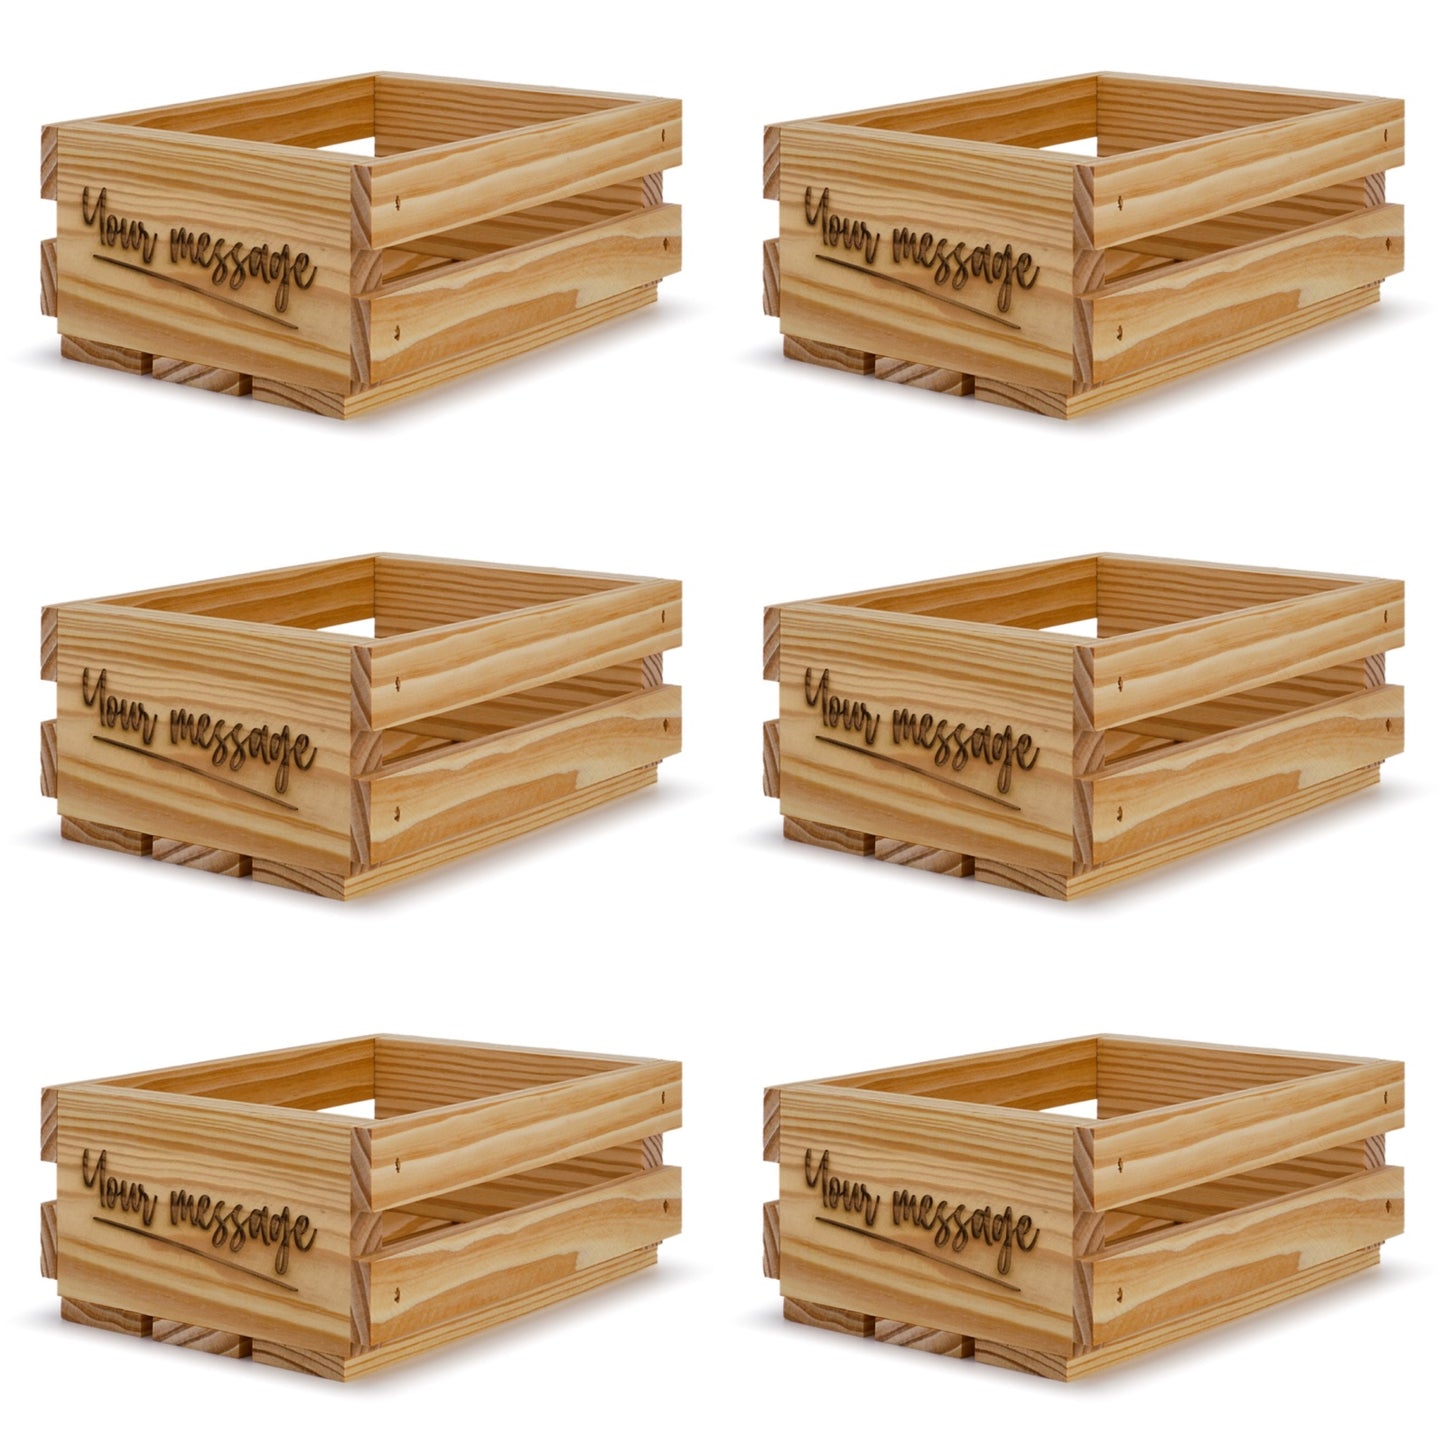 6 Small wooden crates with your message 8x6x3.5